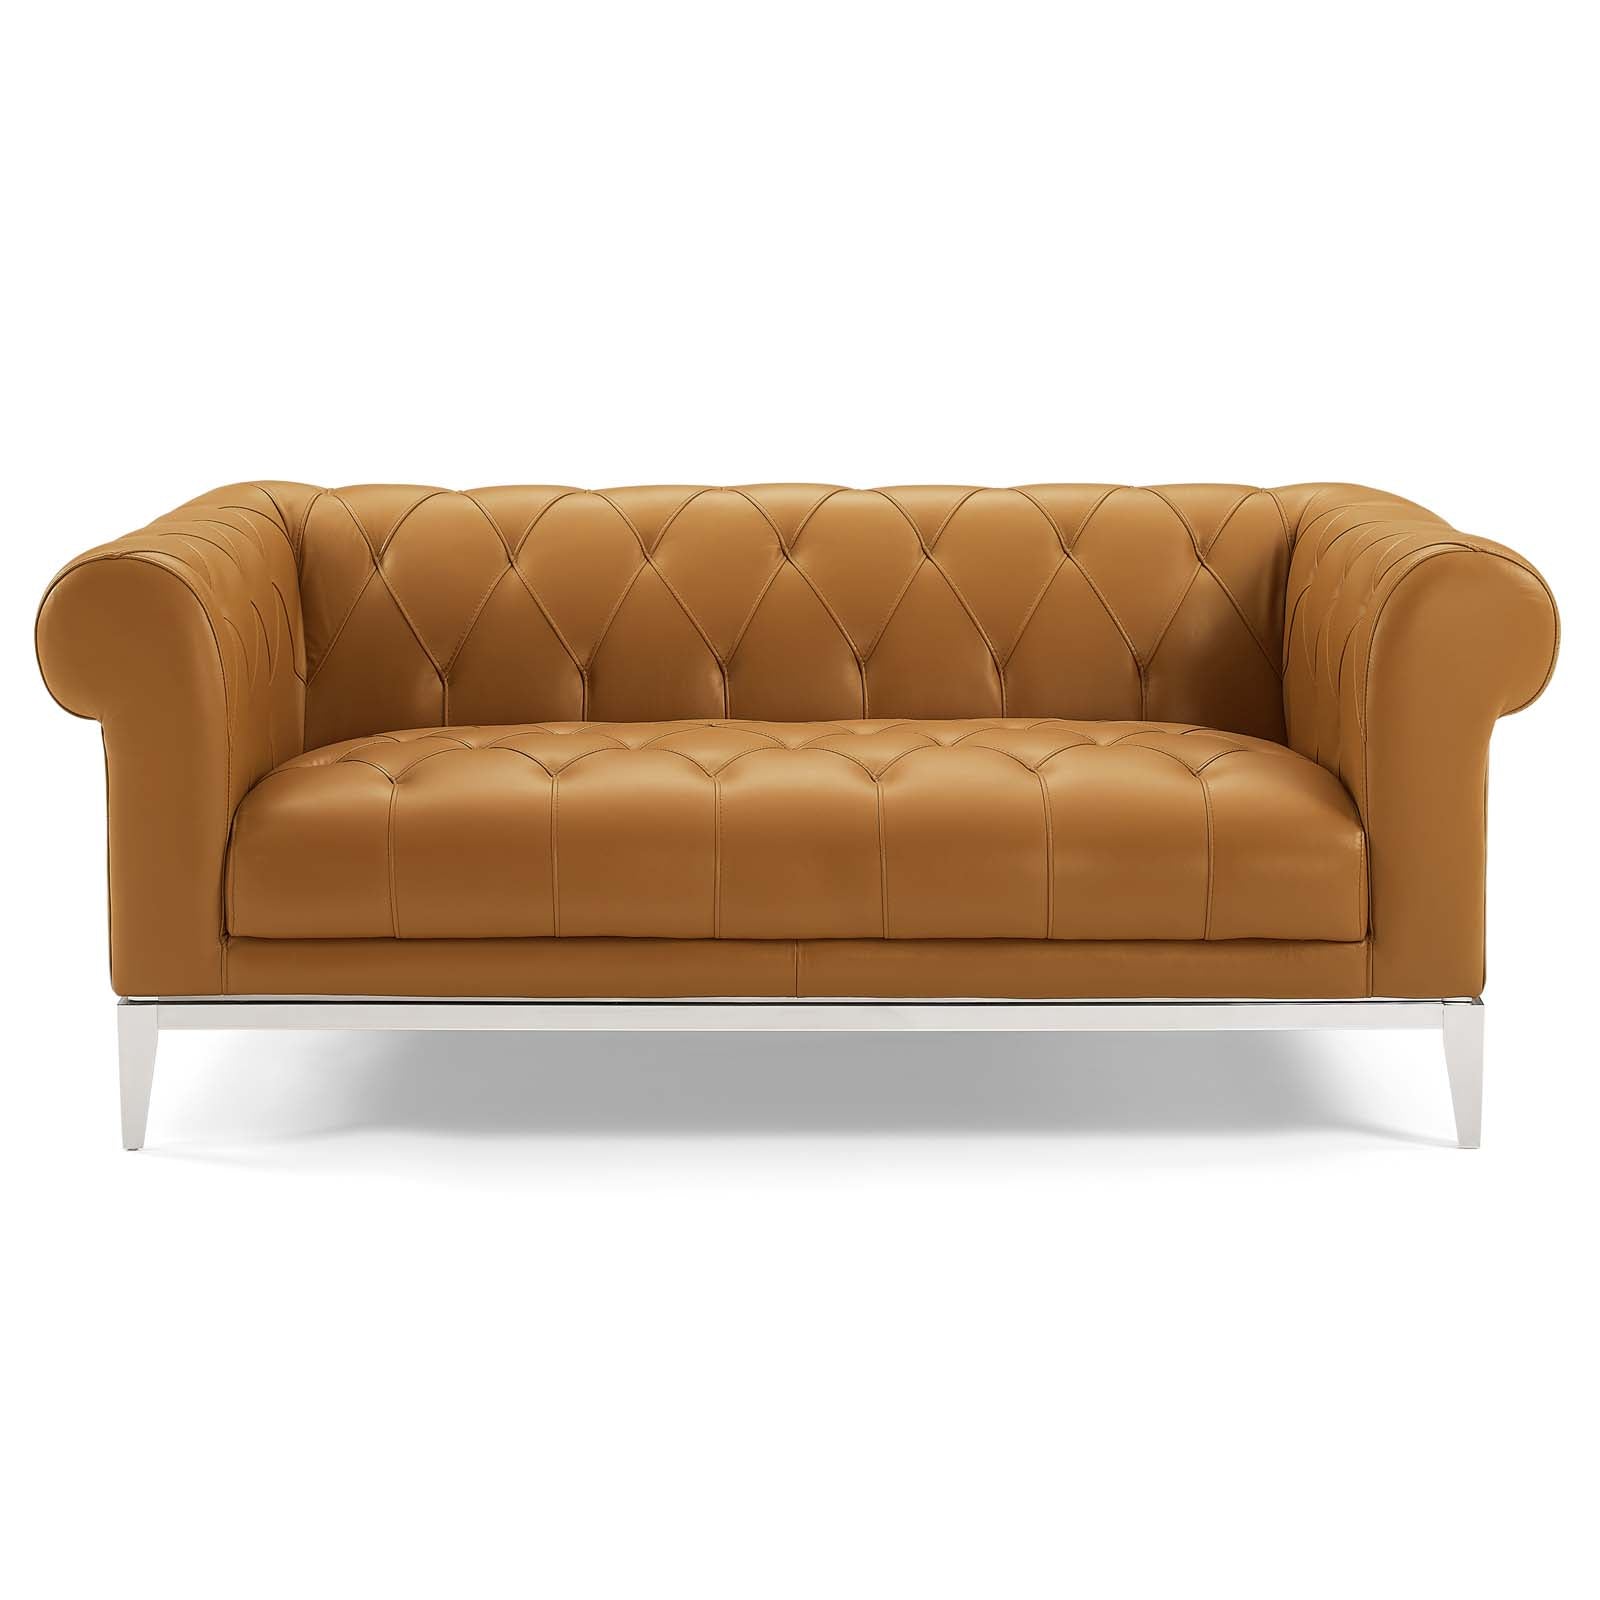 Modway Loveseats - Idyll Tufted Button Upholstered Leather Chesterfield Loveseat Tan